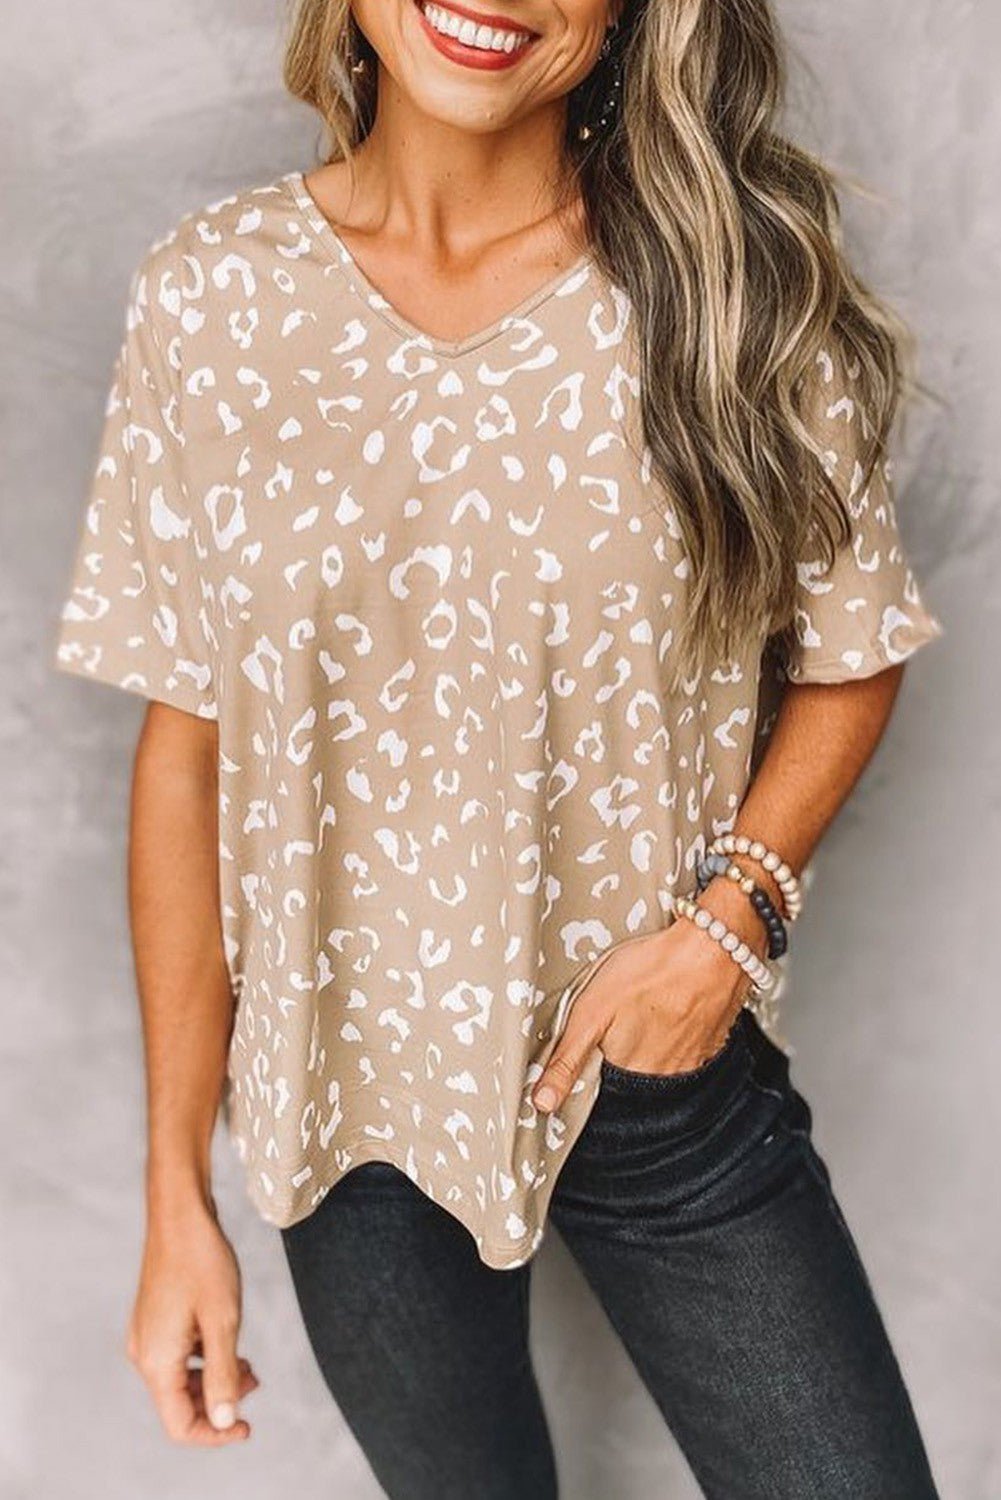 This "It's Spot On Top" is purrfect for adding some wild style to your wardrobe! Crafted from soft, lightweight fabric with a loose fit, the v neck and short sleeves make it comfortable and chic. The apricot leopard print adds a fierce twist - you won't want to miss out!